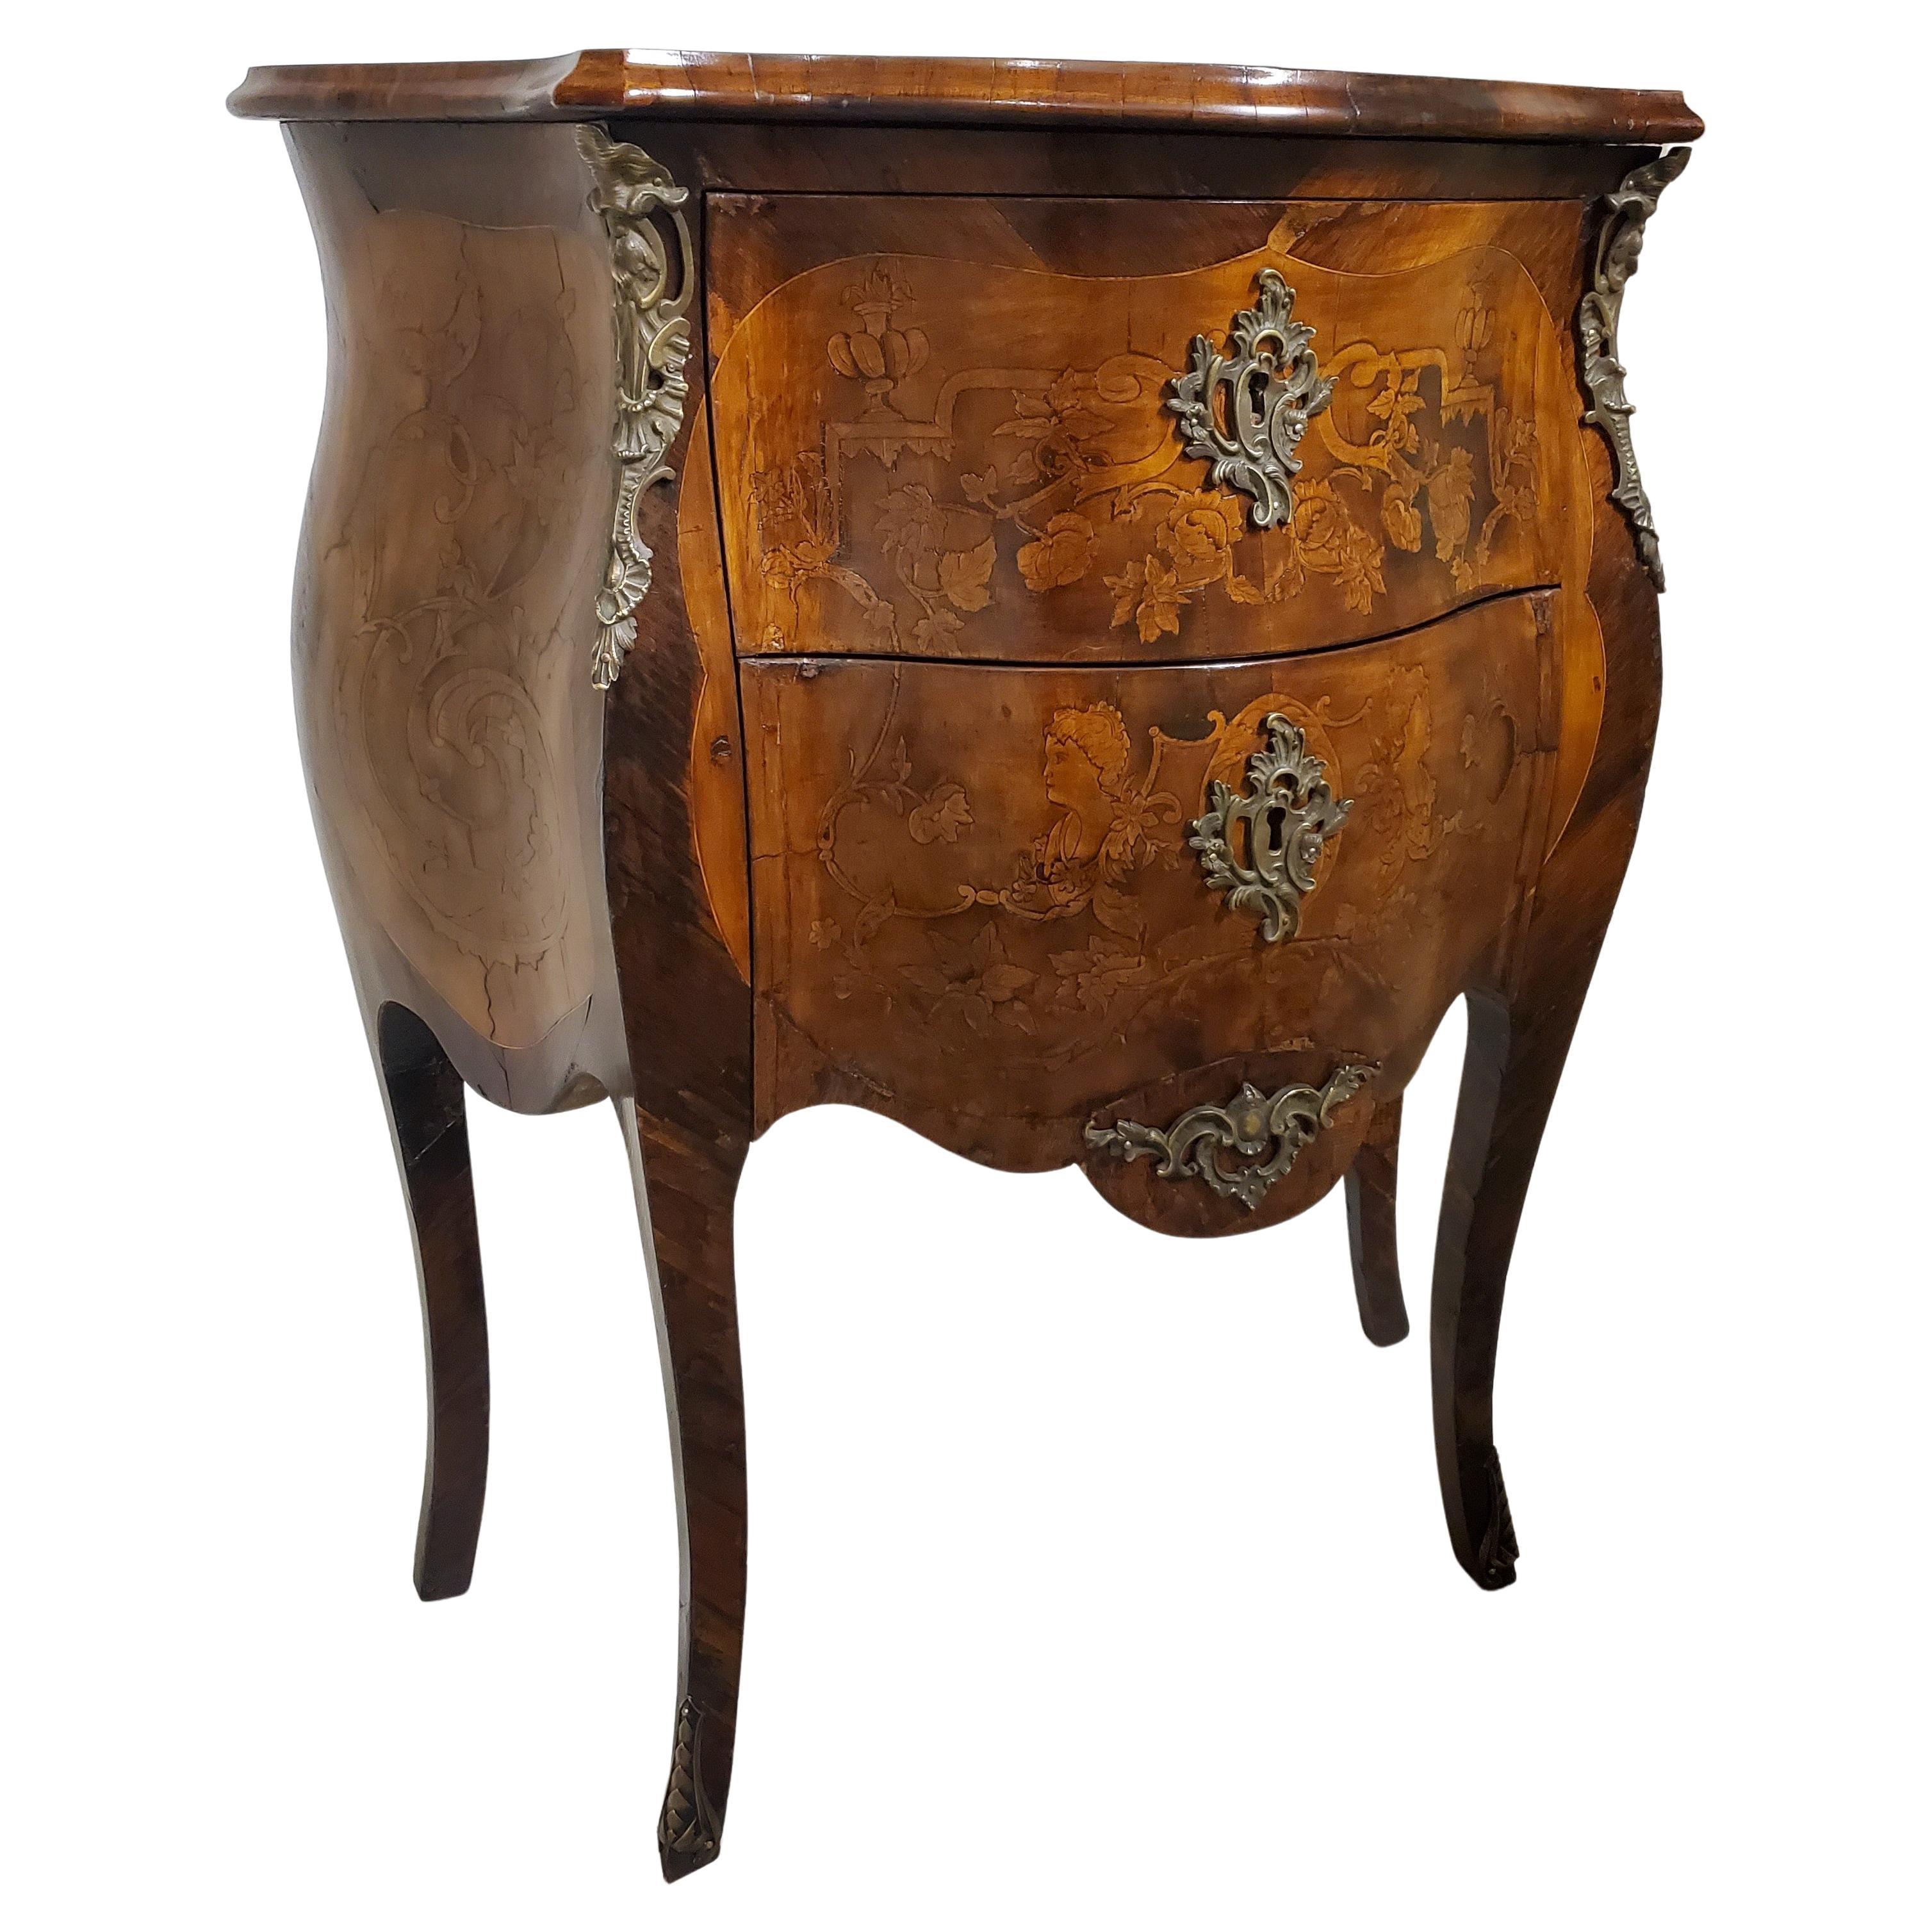 This LV style antique cabinet features exquisite parquetry with inlaid details gracing all four sides, even the top! Its two bombe drawers and serpentine shaped top with beveled edge create a striking visual appeal. The cabinet is further